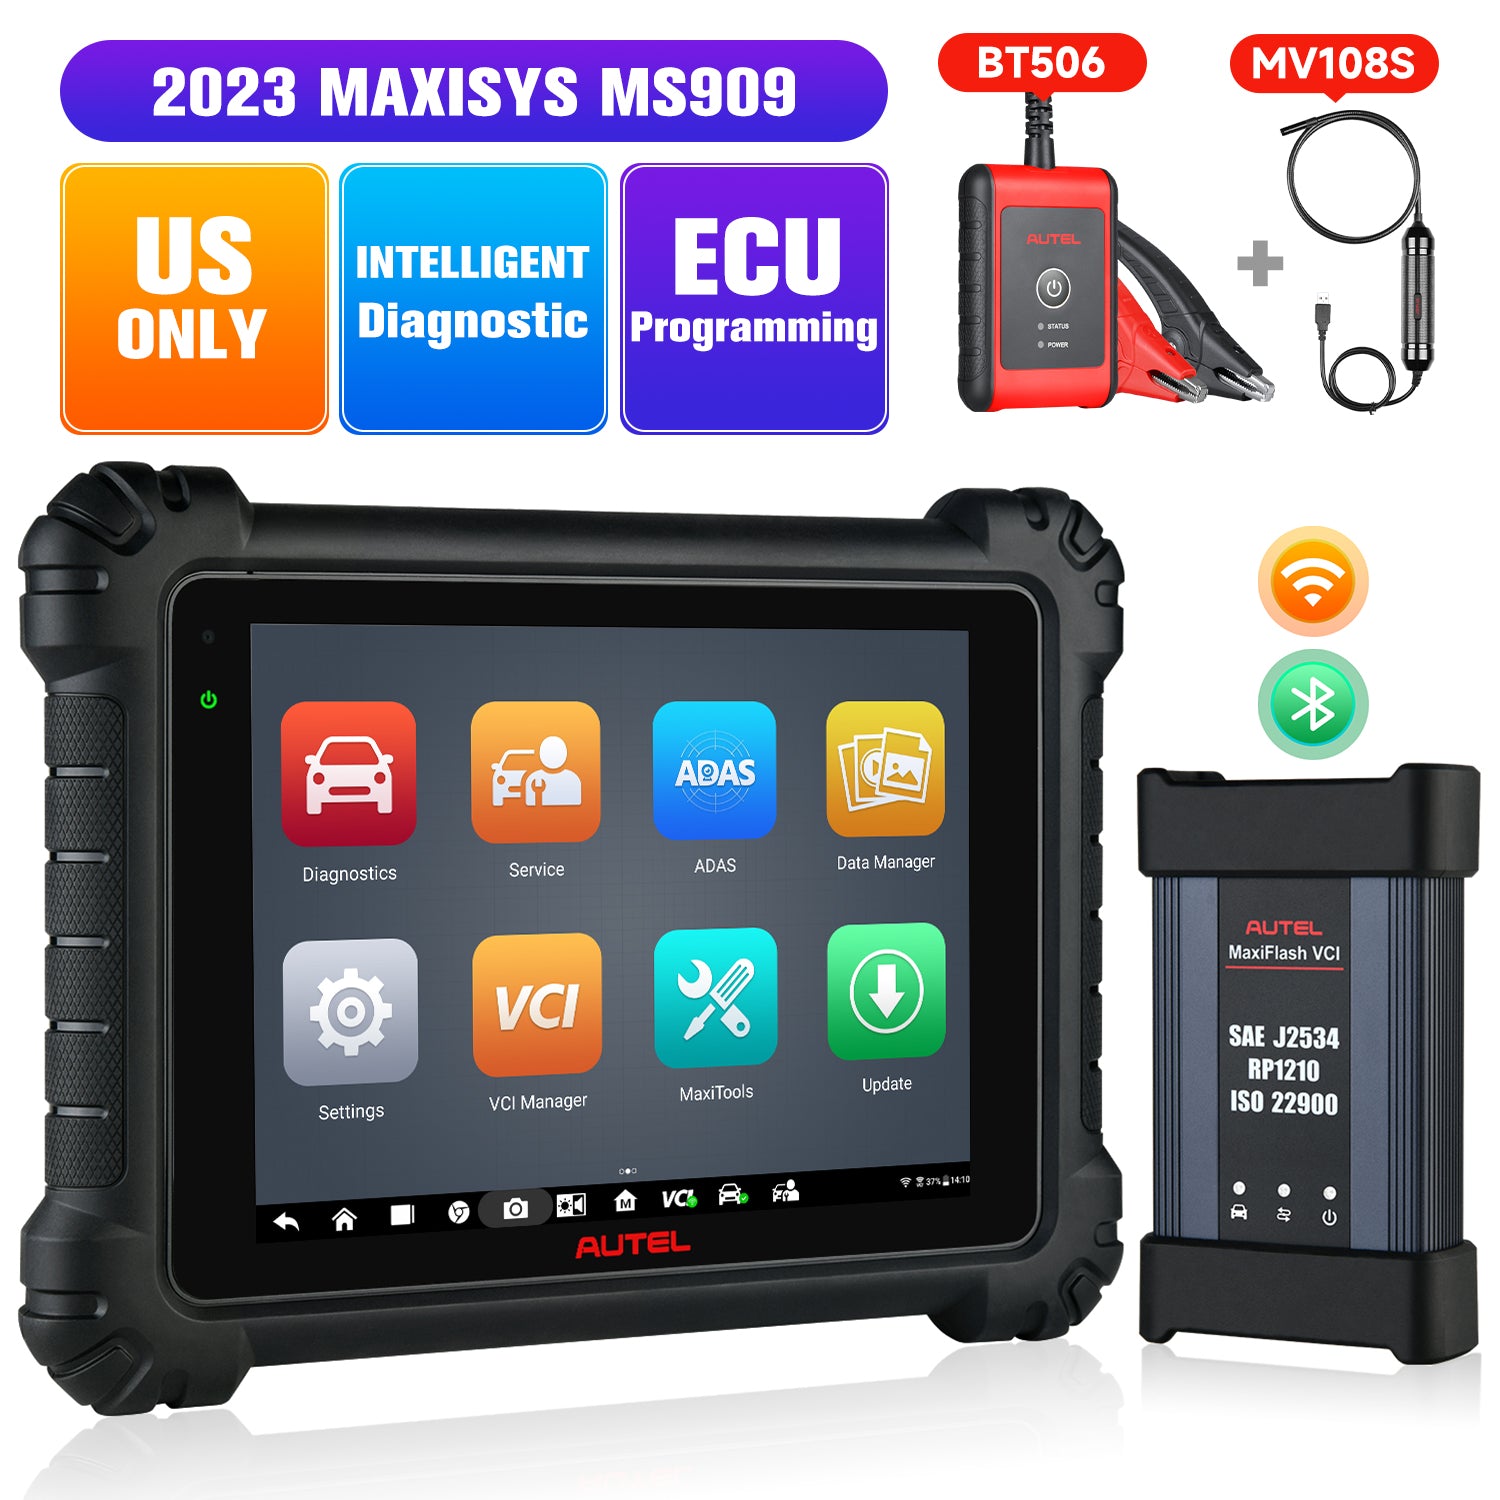 Autel Maxisys MS909 and MV108S and BT506 intelligent diagnostic